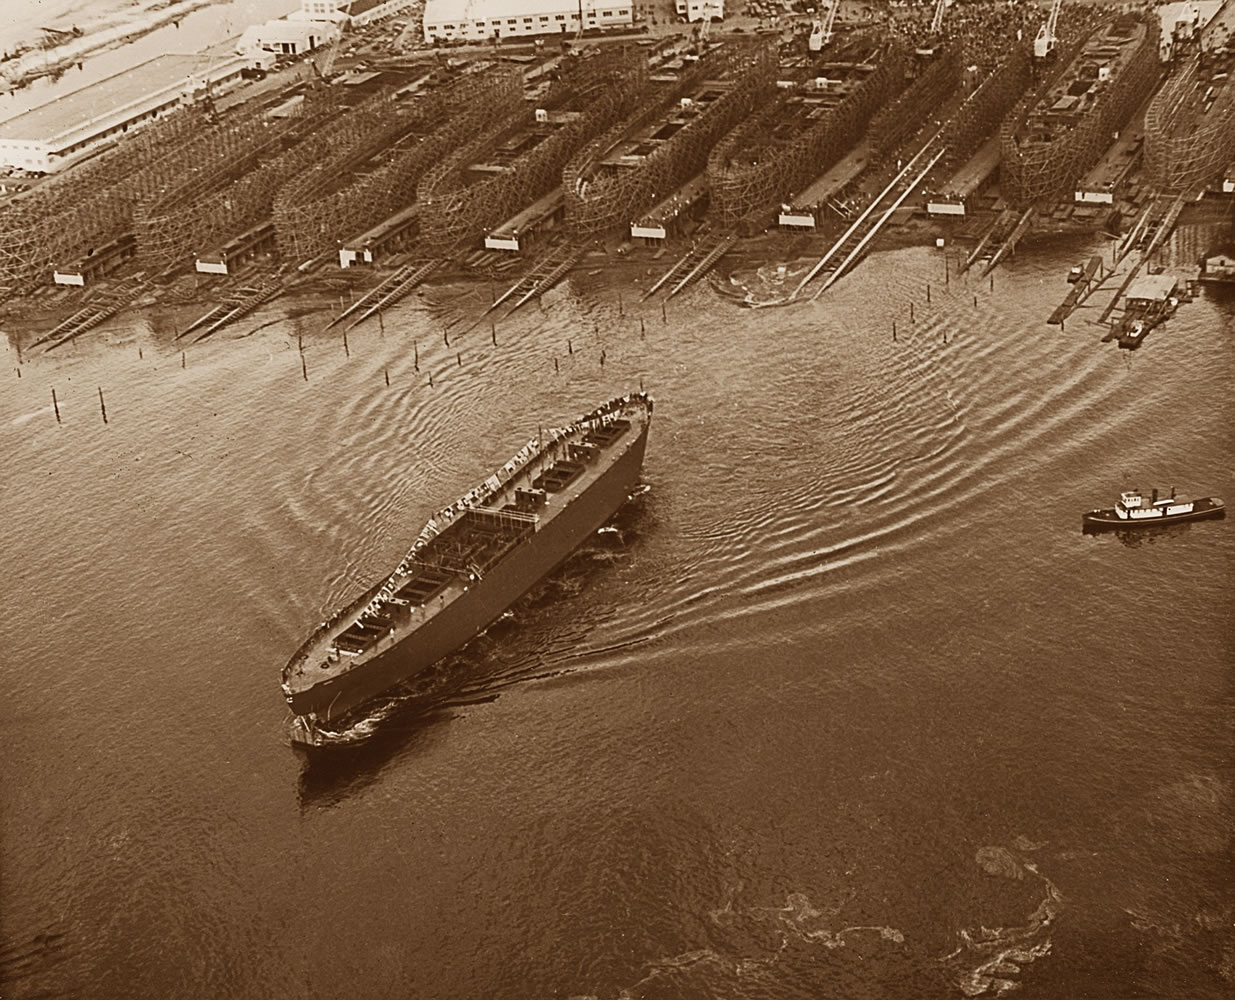 Confluence
An aerial photo taken by Lev Richards during the first launching at Vancouver's Kaiser shipyard in 1942.